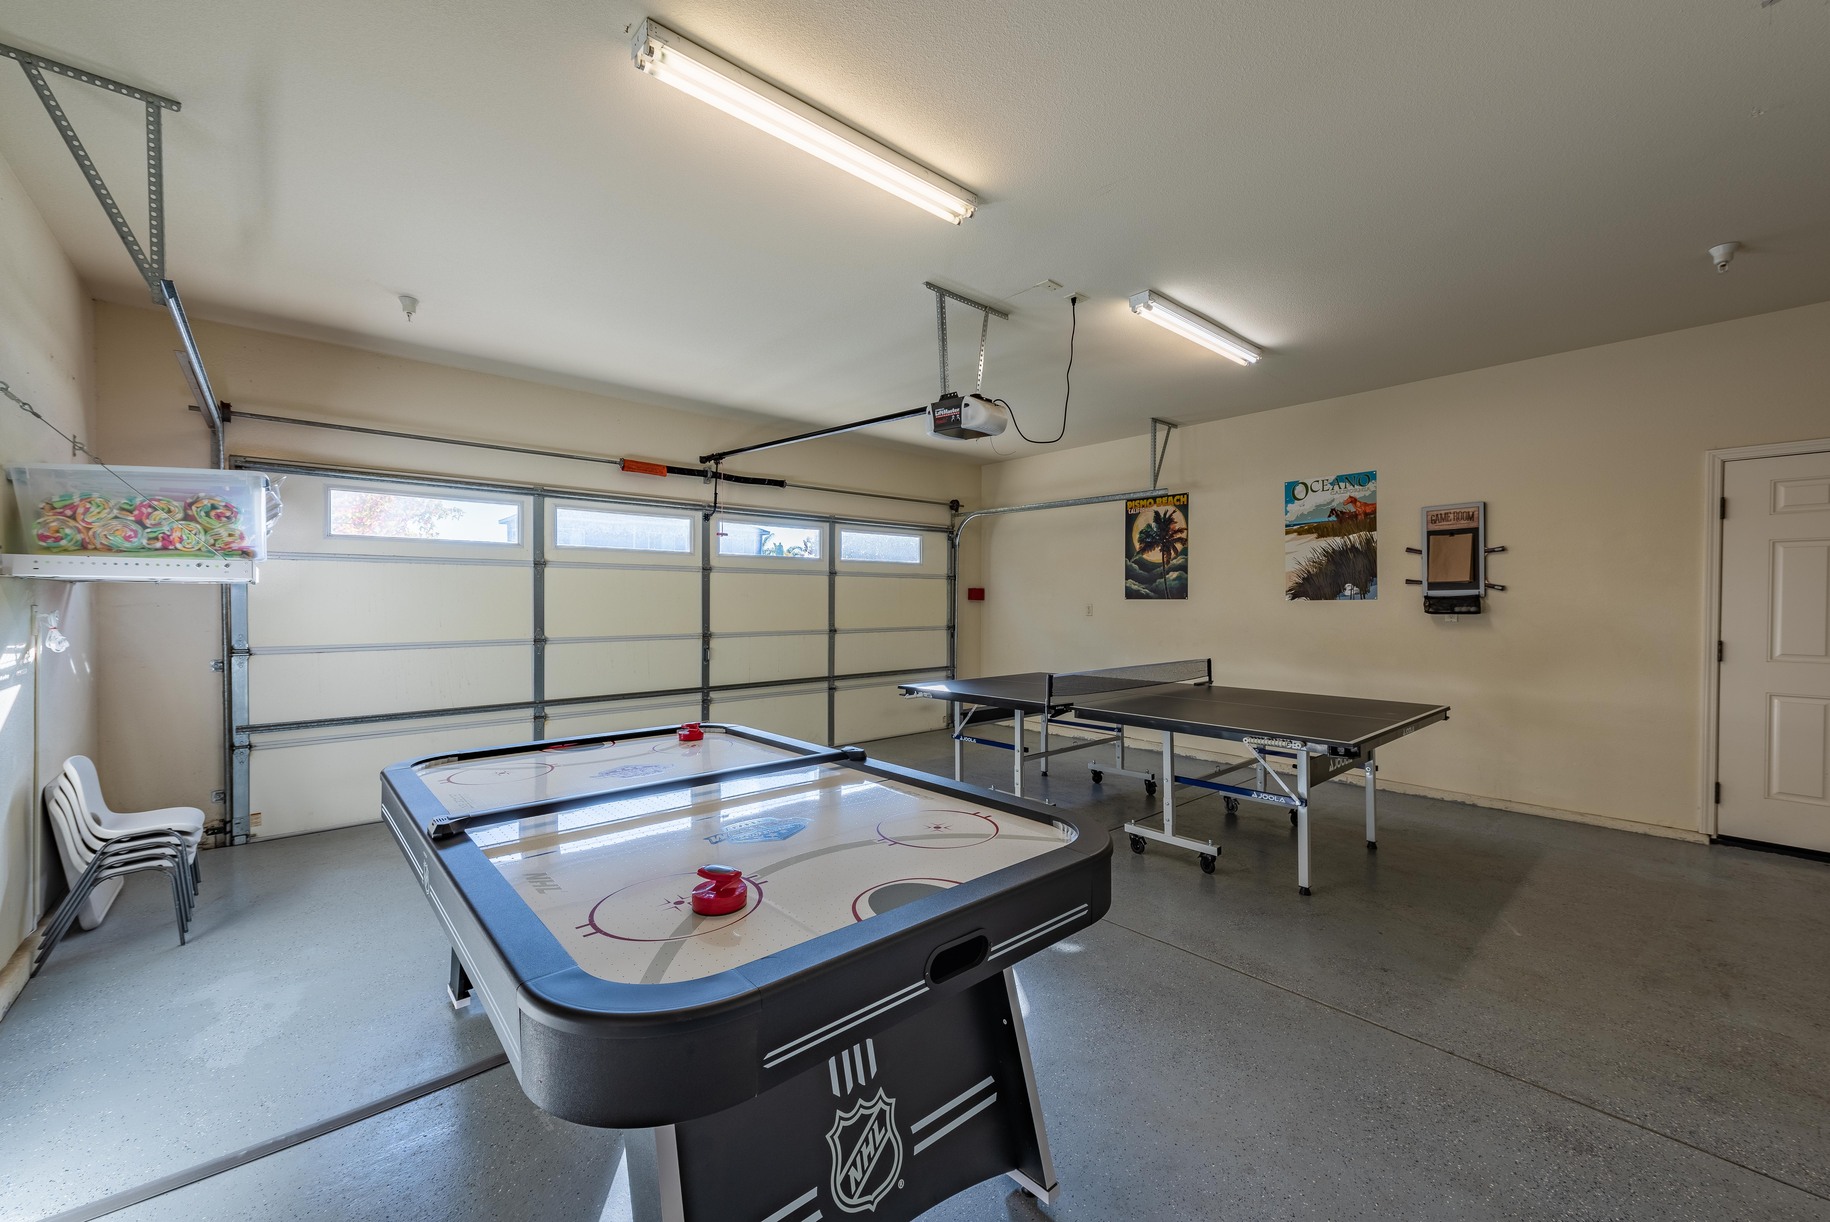 Game room in the garage